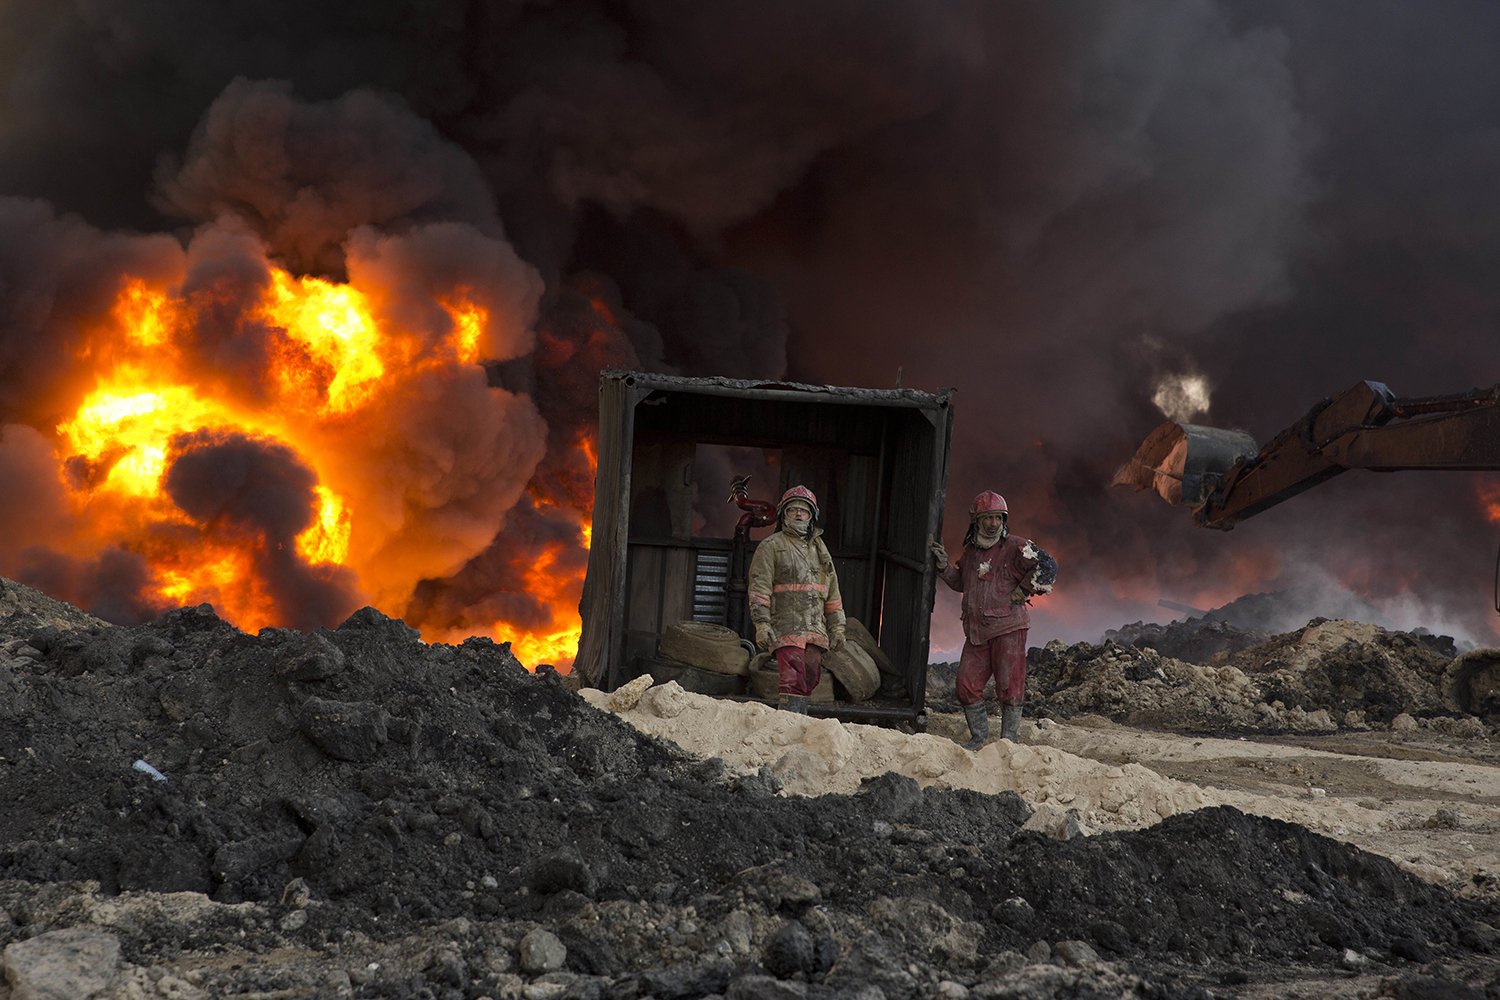 Fire fighters work to well an oil fire set by Islamic State militants in Qayara, south of Mosul, Iraq, Monday, Nov. 28, 2016. (AP Photo/Maya Alleruzzo)